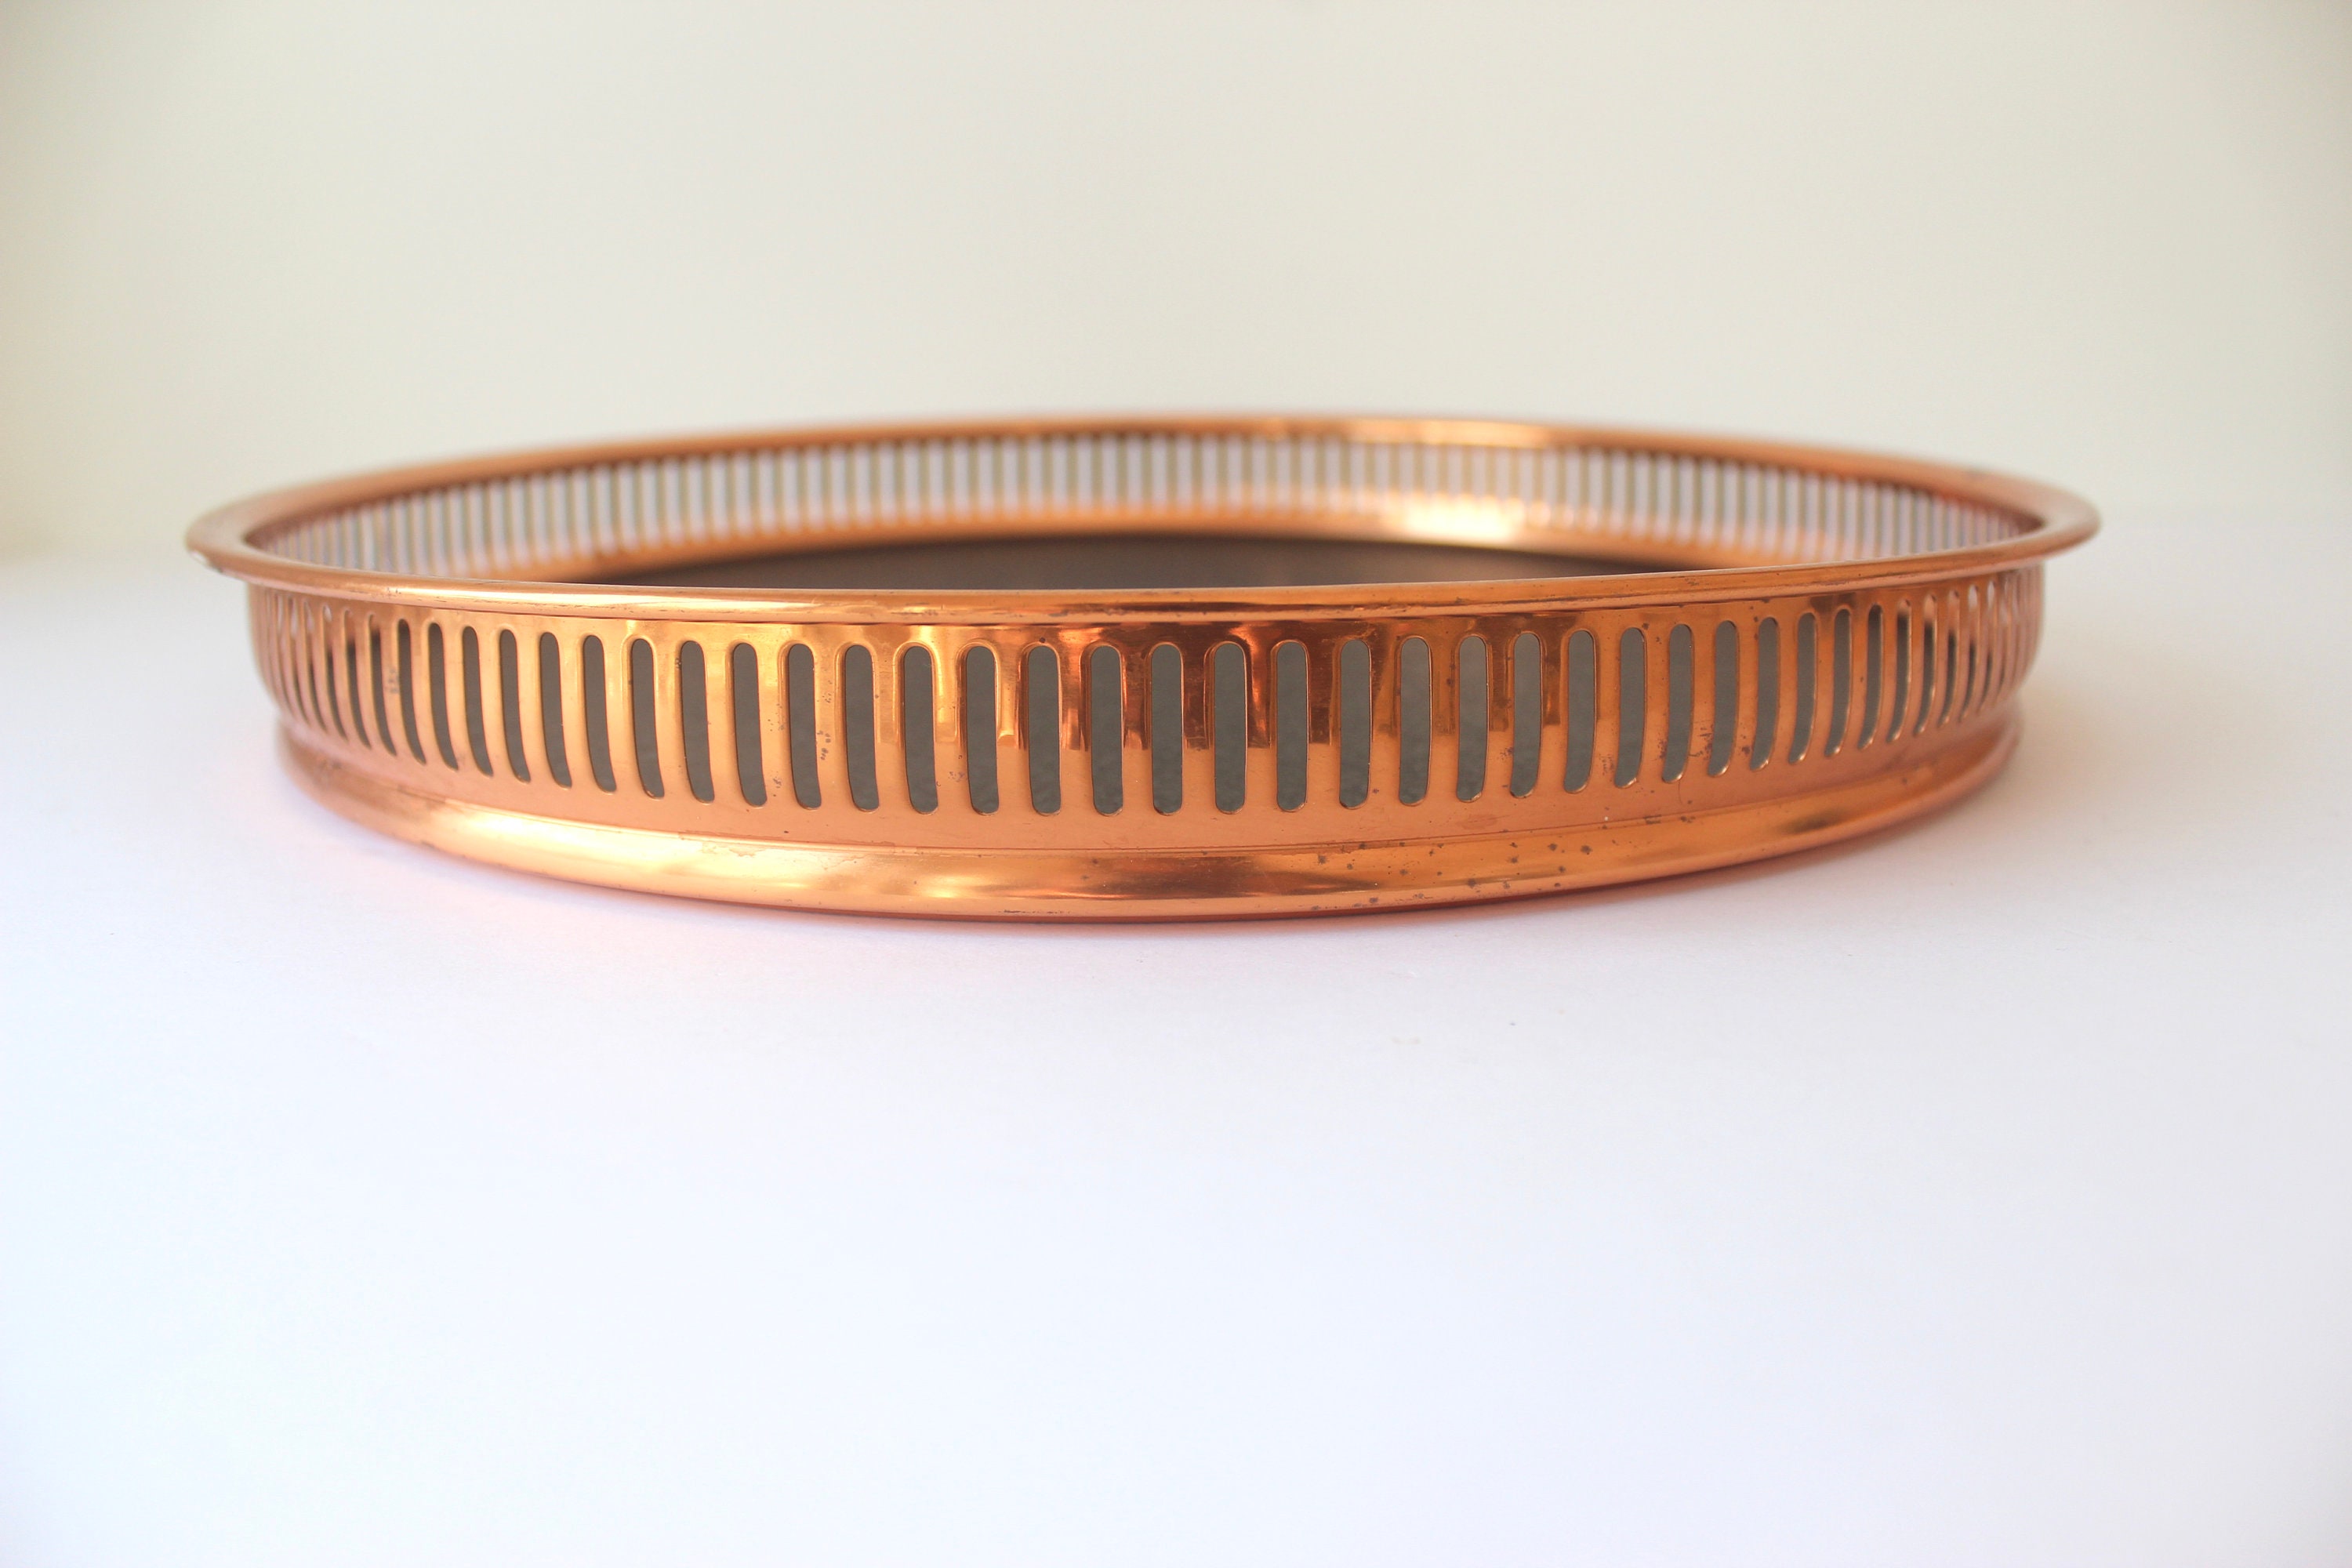 40cm Copper Round Plate - Food Serving Tray – R & B Import